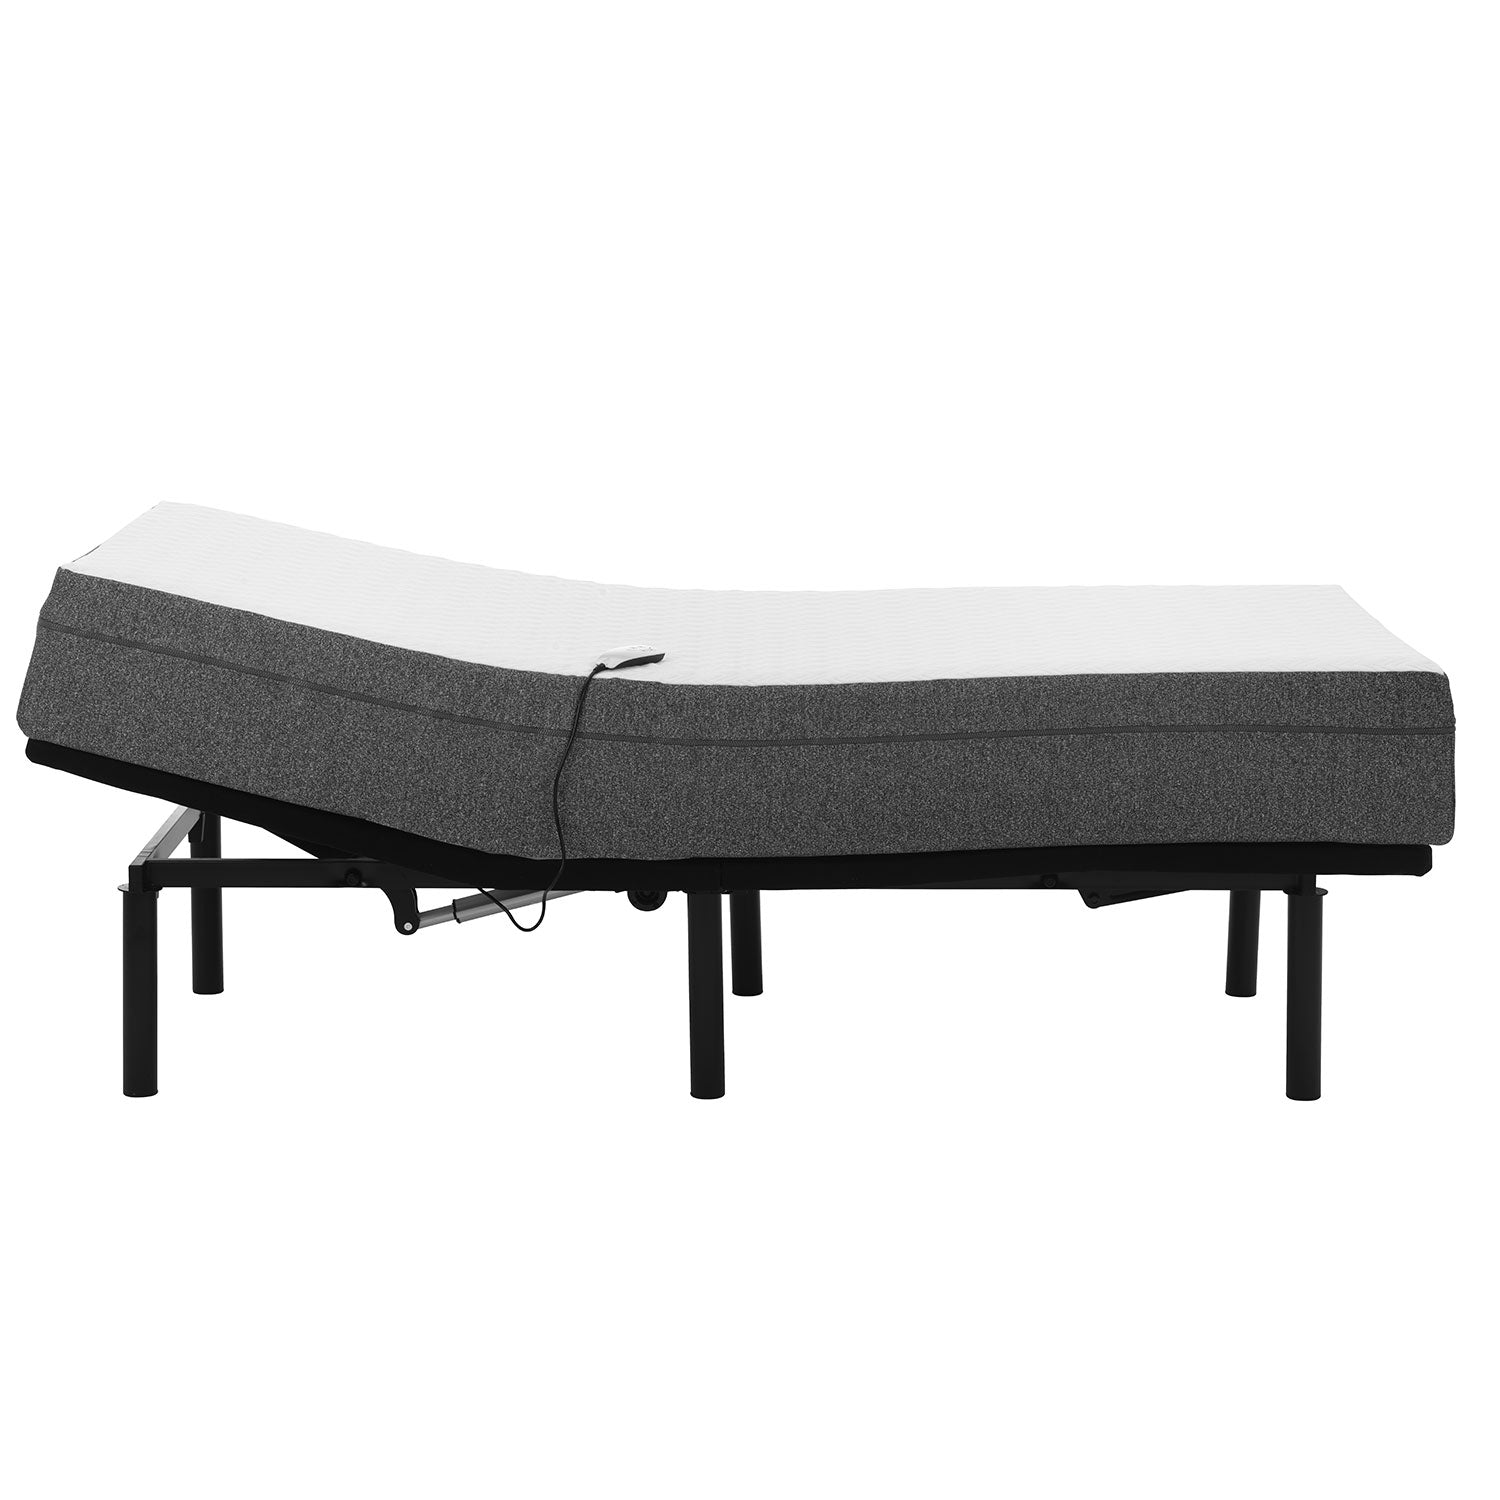 Adjustable Bed Frame and 10" Cool Gel Infused Medium Firm Memory Foam Mattress - BlissfulNights.com